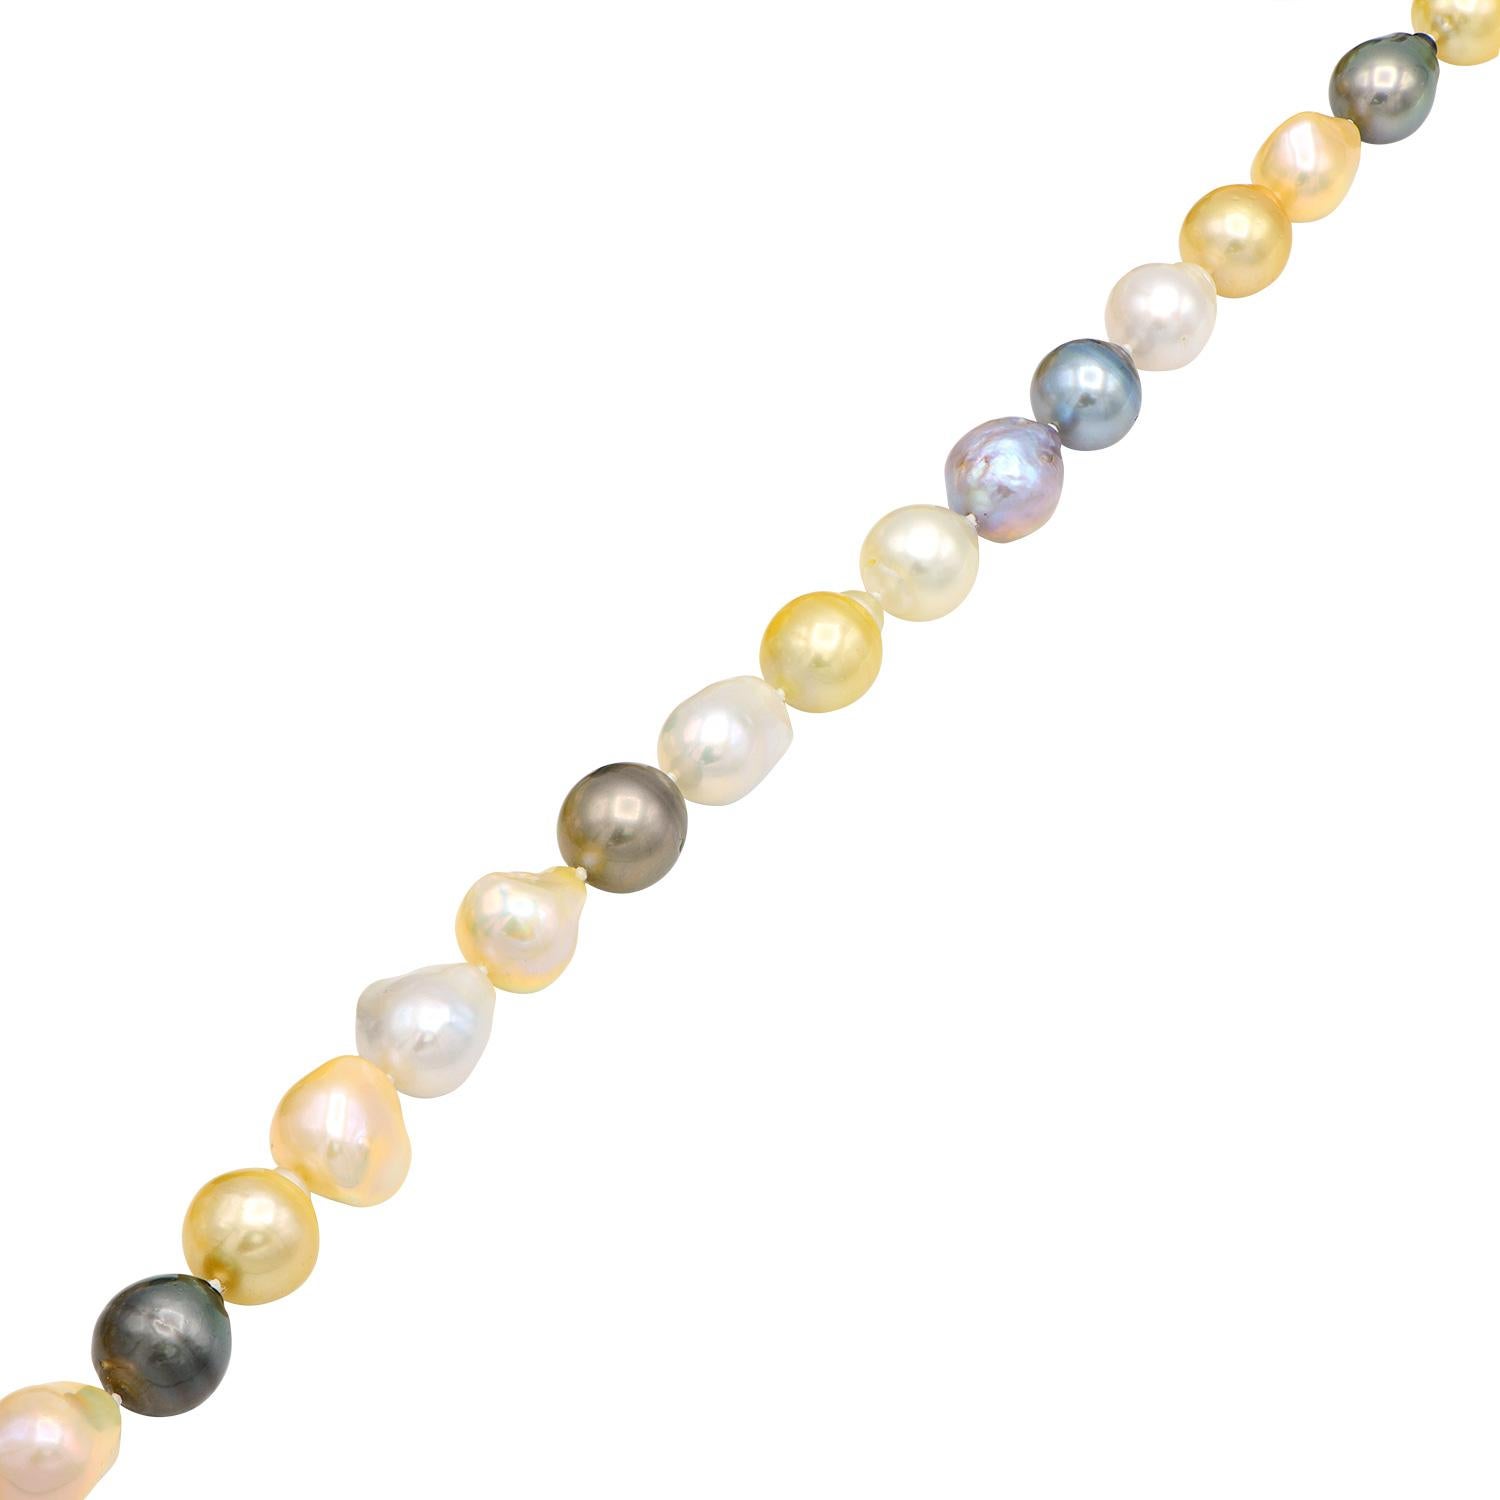 This beautiful necklace is made from pink freshwater pearls, gold and white south sea pearls, and black Tahitian pearls. The pearls are all baroque which makes them all unique in their size, shape and colors. The pearls are from 13-15.8mm and are